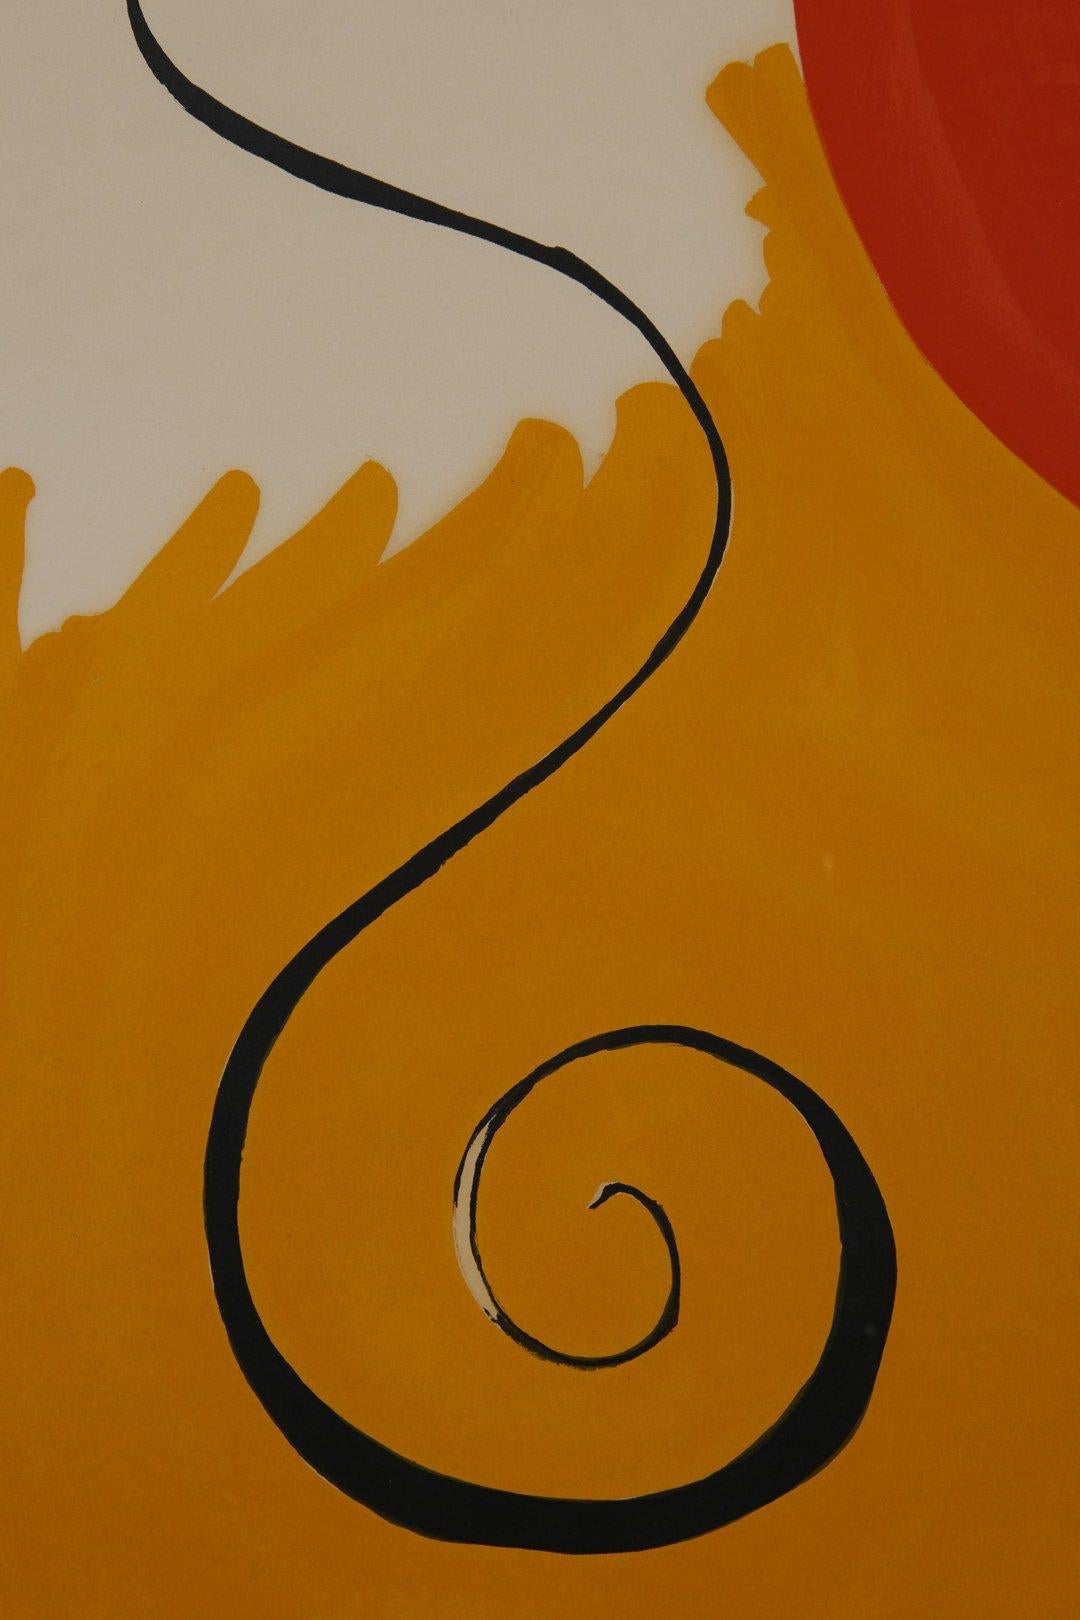 Red Sphere on Yellow Ground, mid-century modern abstract lithograph - Modern Print by Alexander Calder